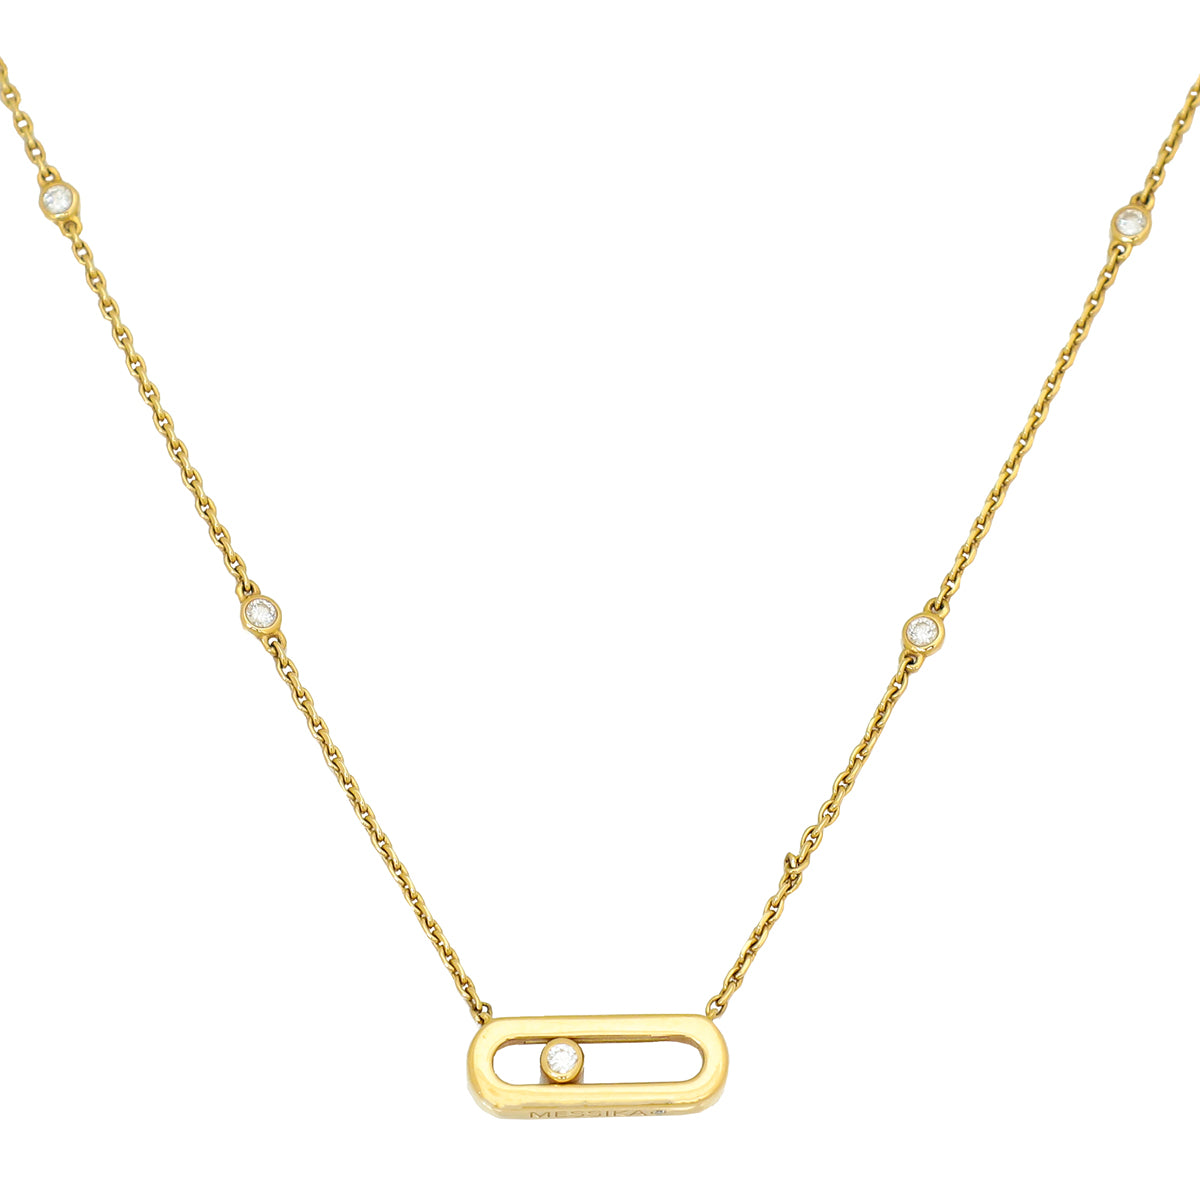 Messika 18K Yellow Gold Uno Move Diamond Necklace